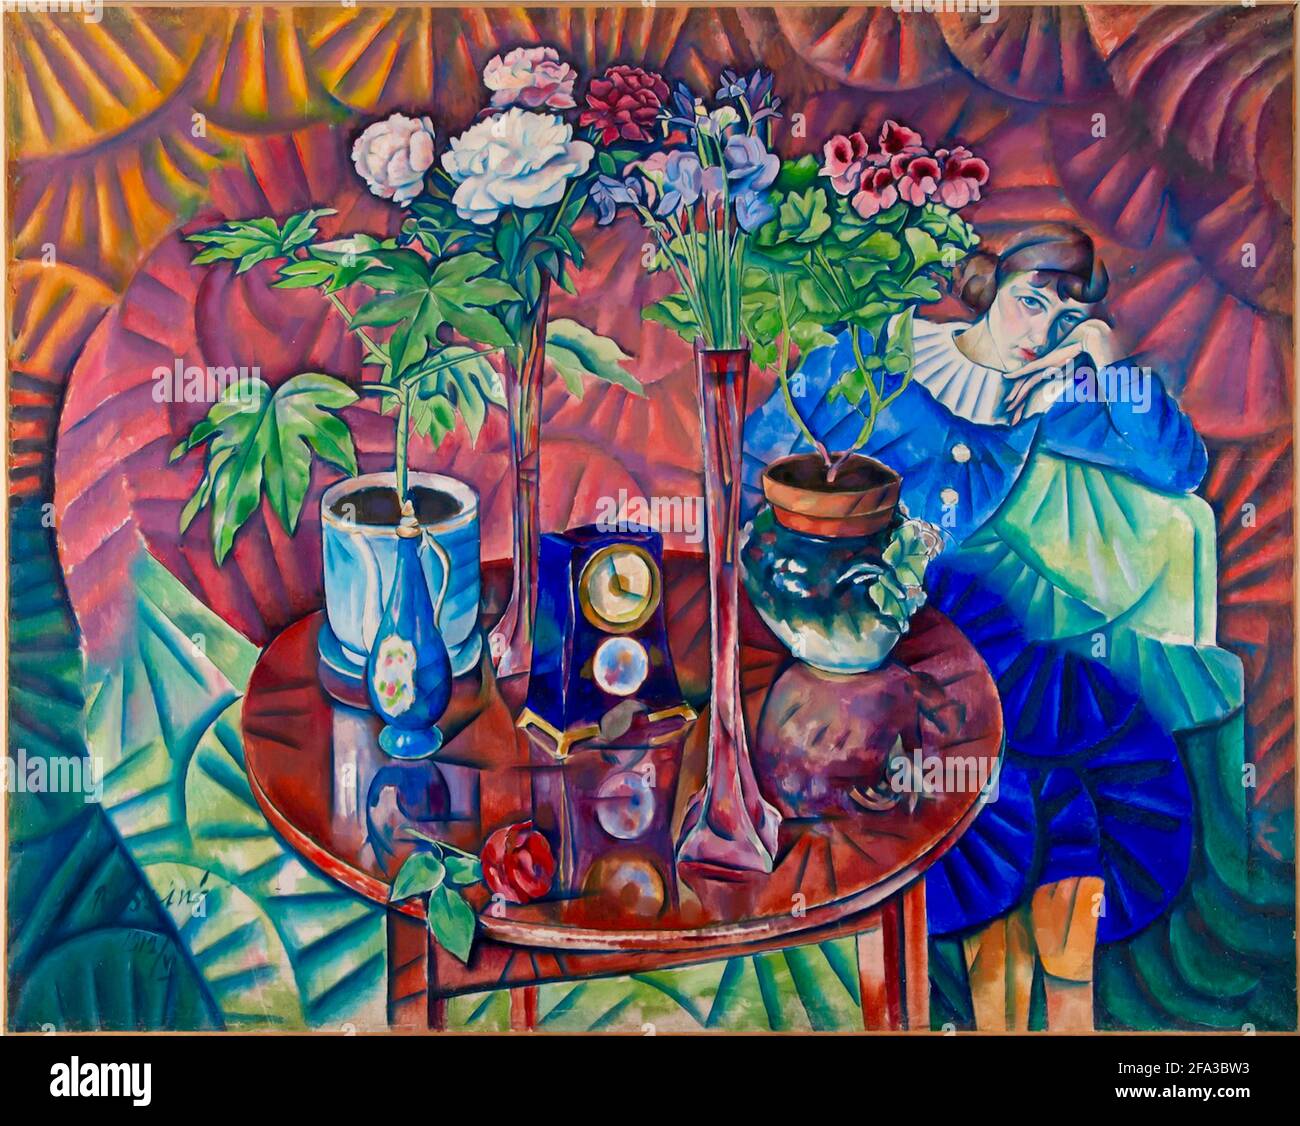 Vladimir Baranov-Rossine artwork entitled Cousin with Flowers. A woman sits, head in hand, at a table with flowers and a clock. Stock Photo